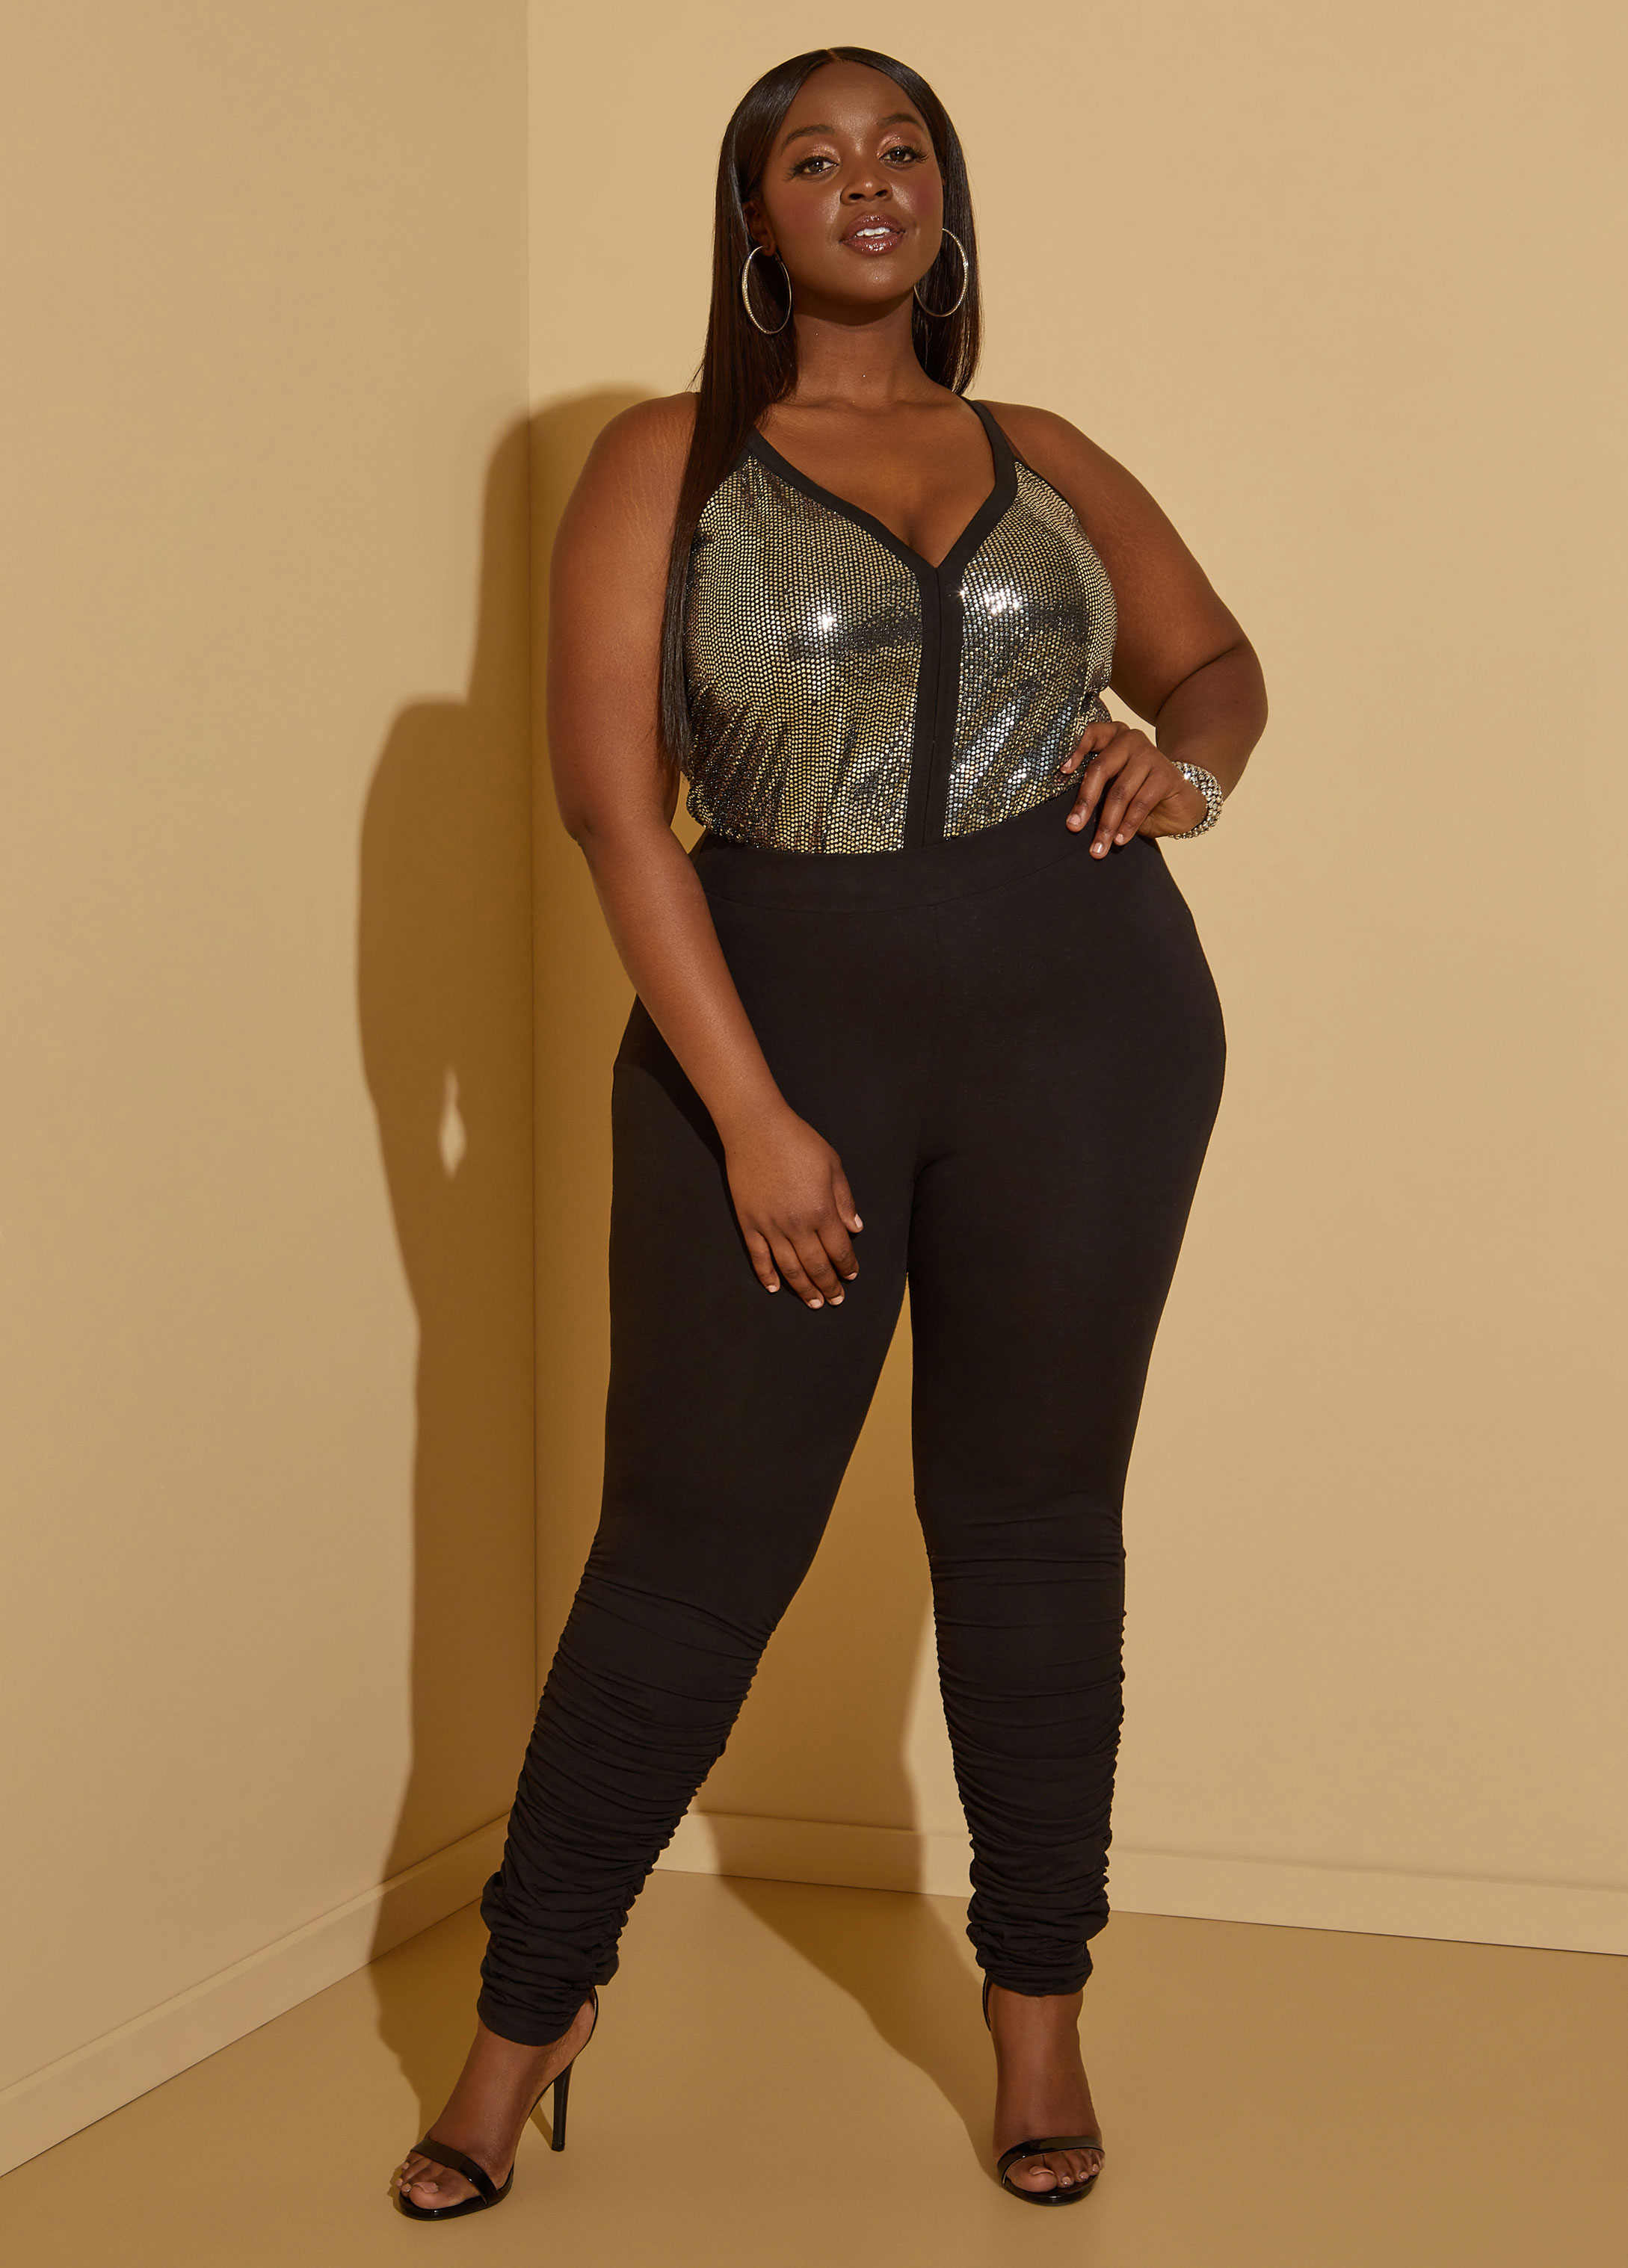 Slinkystylez - CURVY / PLUS SIZE LEGGINGS: Many of our customers